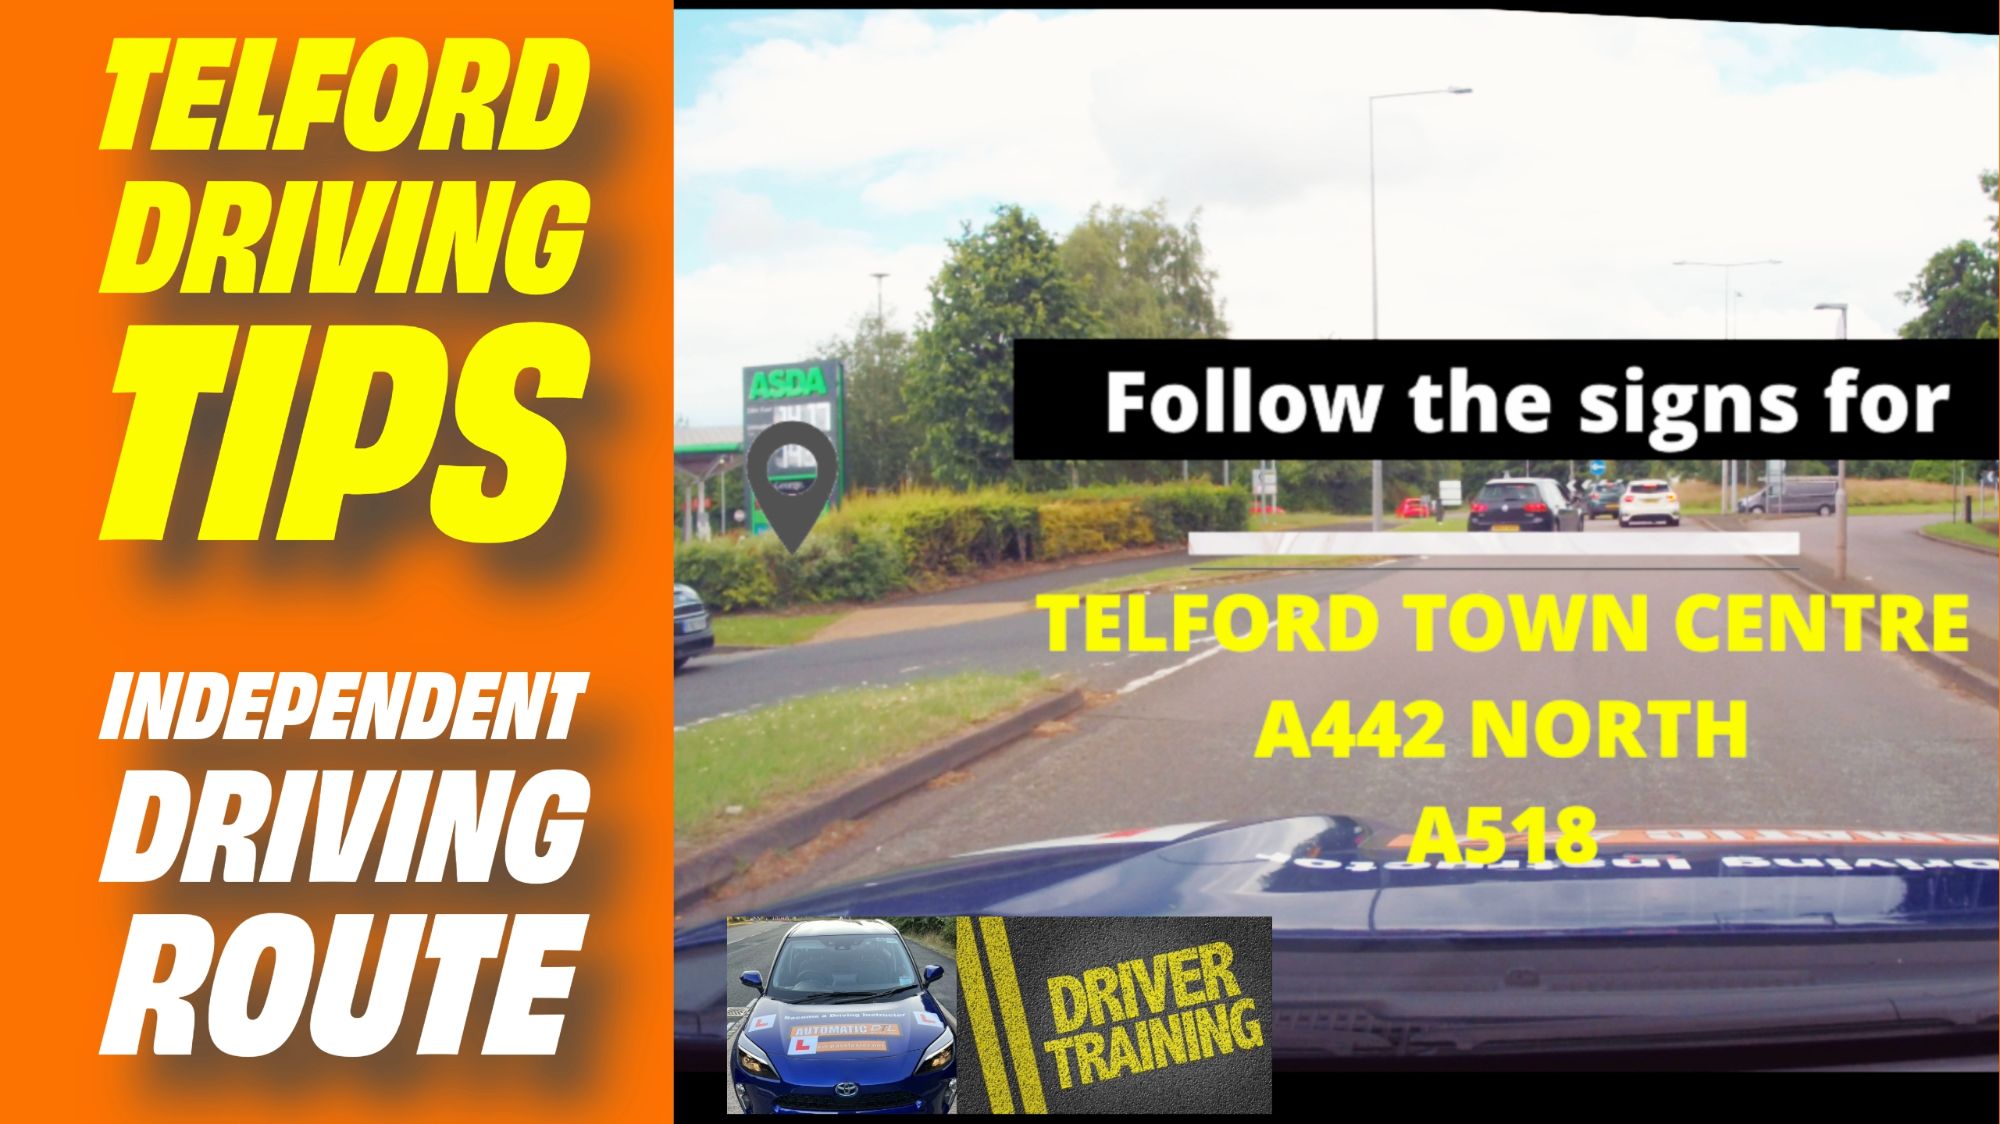 telford driving test routes independent driving section telford town centre